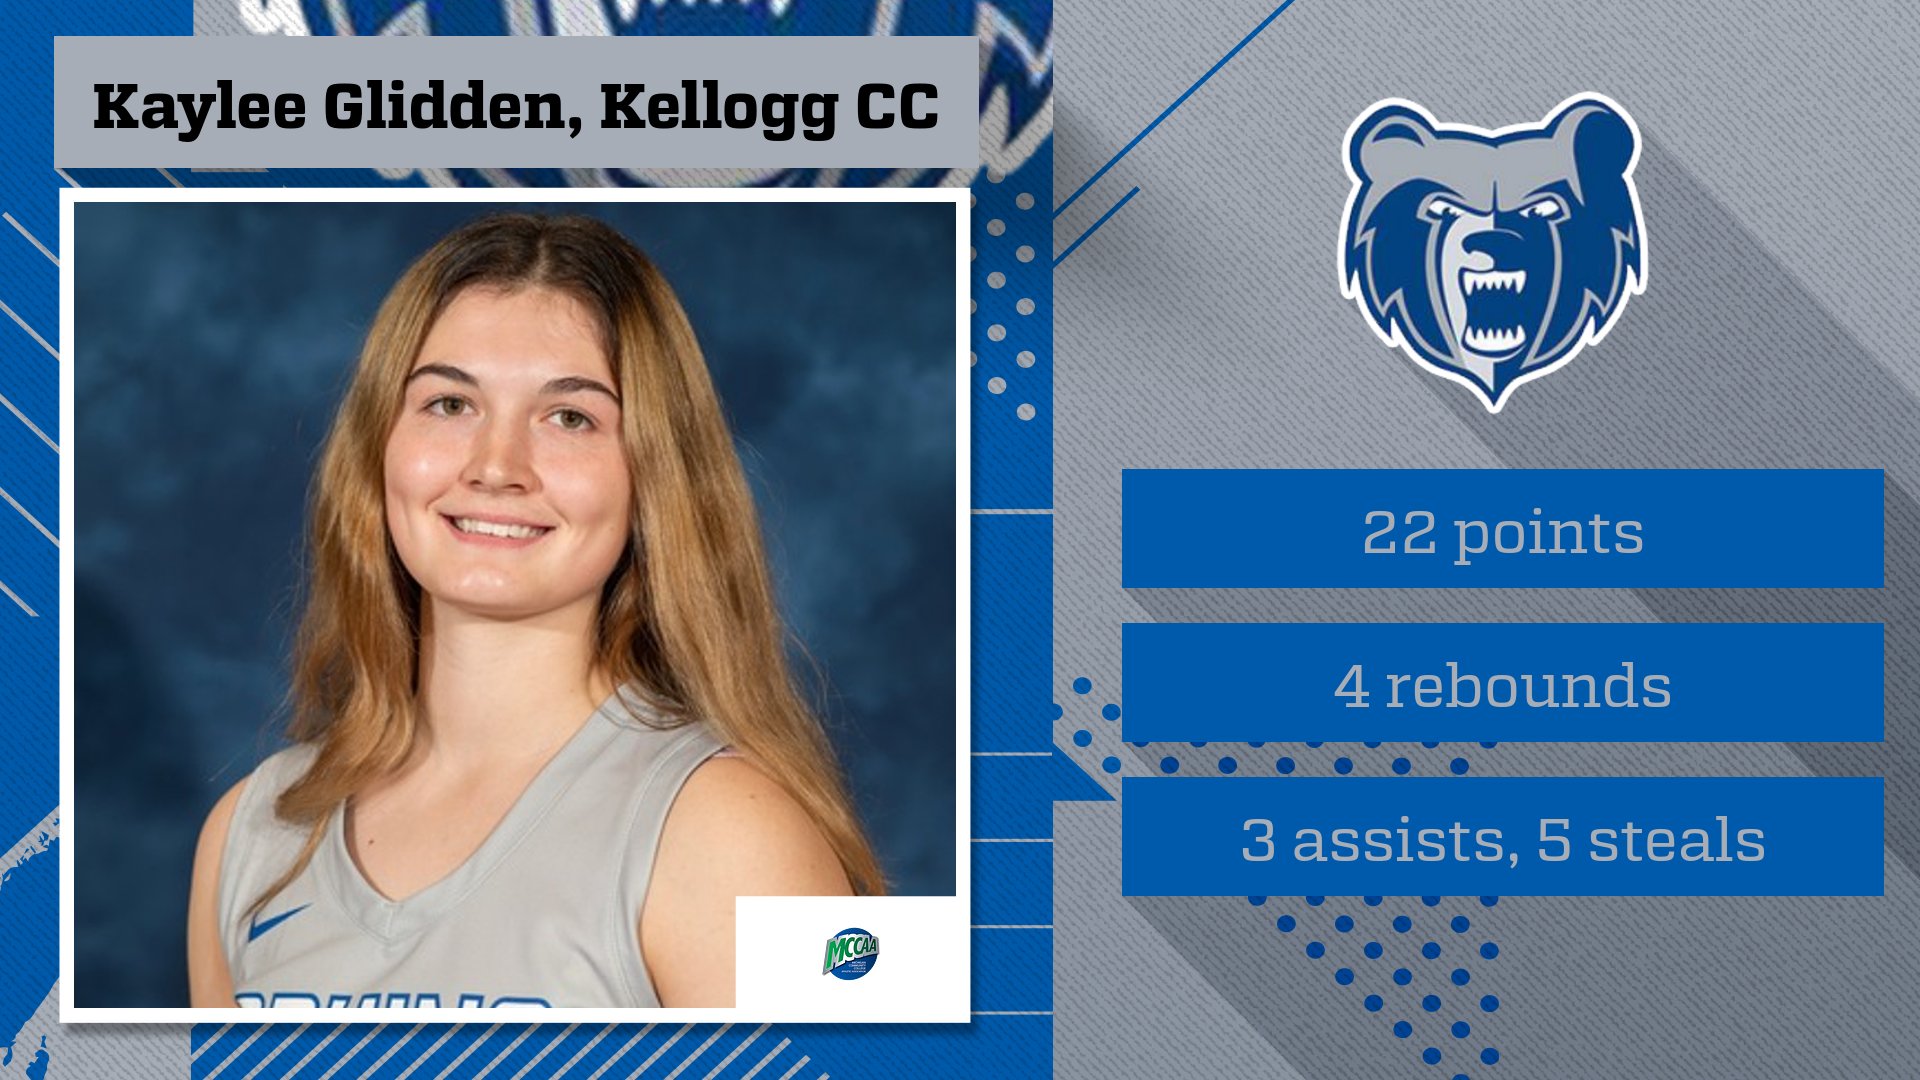 Bruins' Glidden is a Four-Time MCCAA Western Conference Women's Basketball Player of the Week Honoree